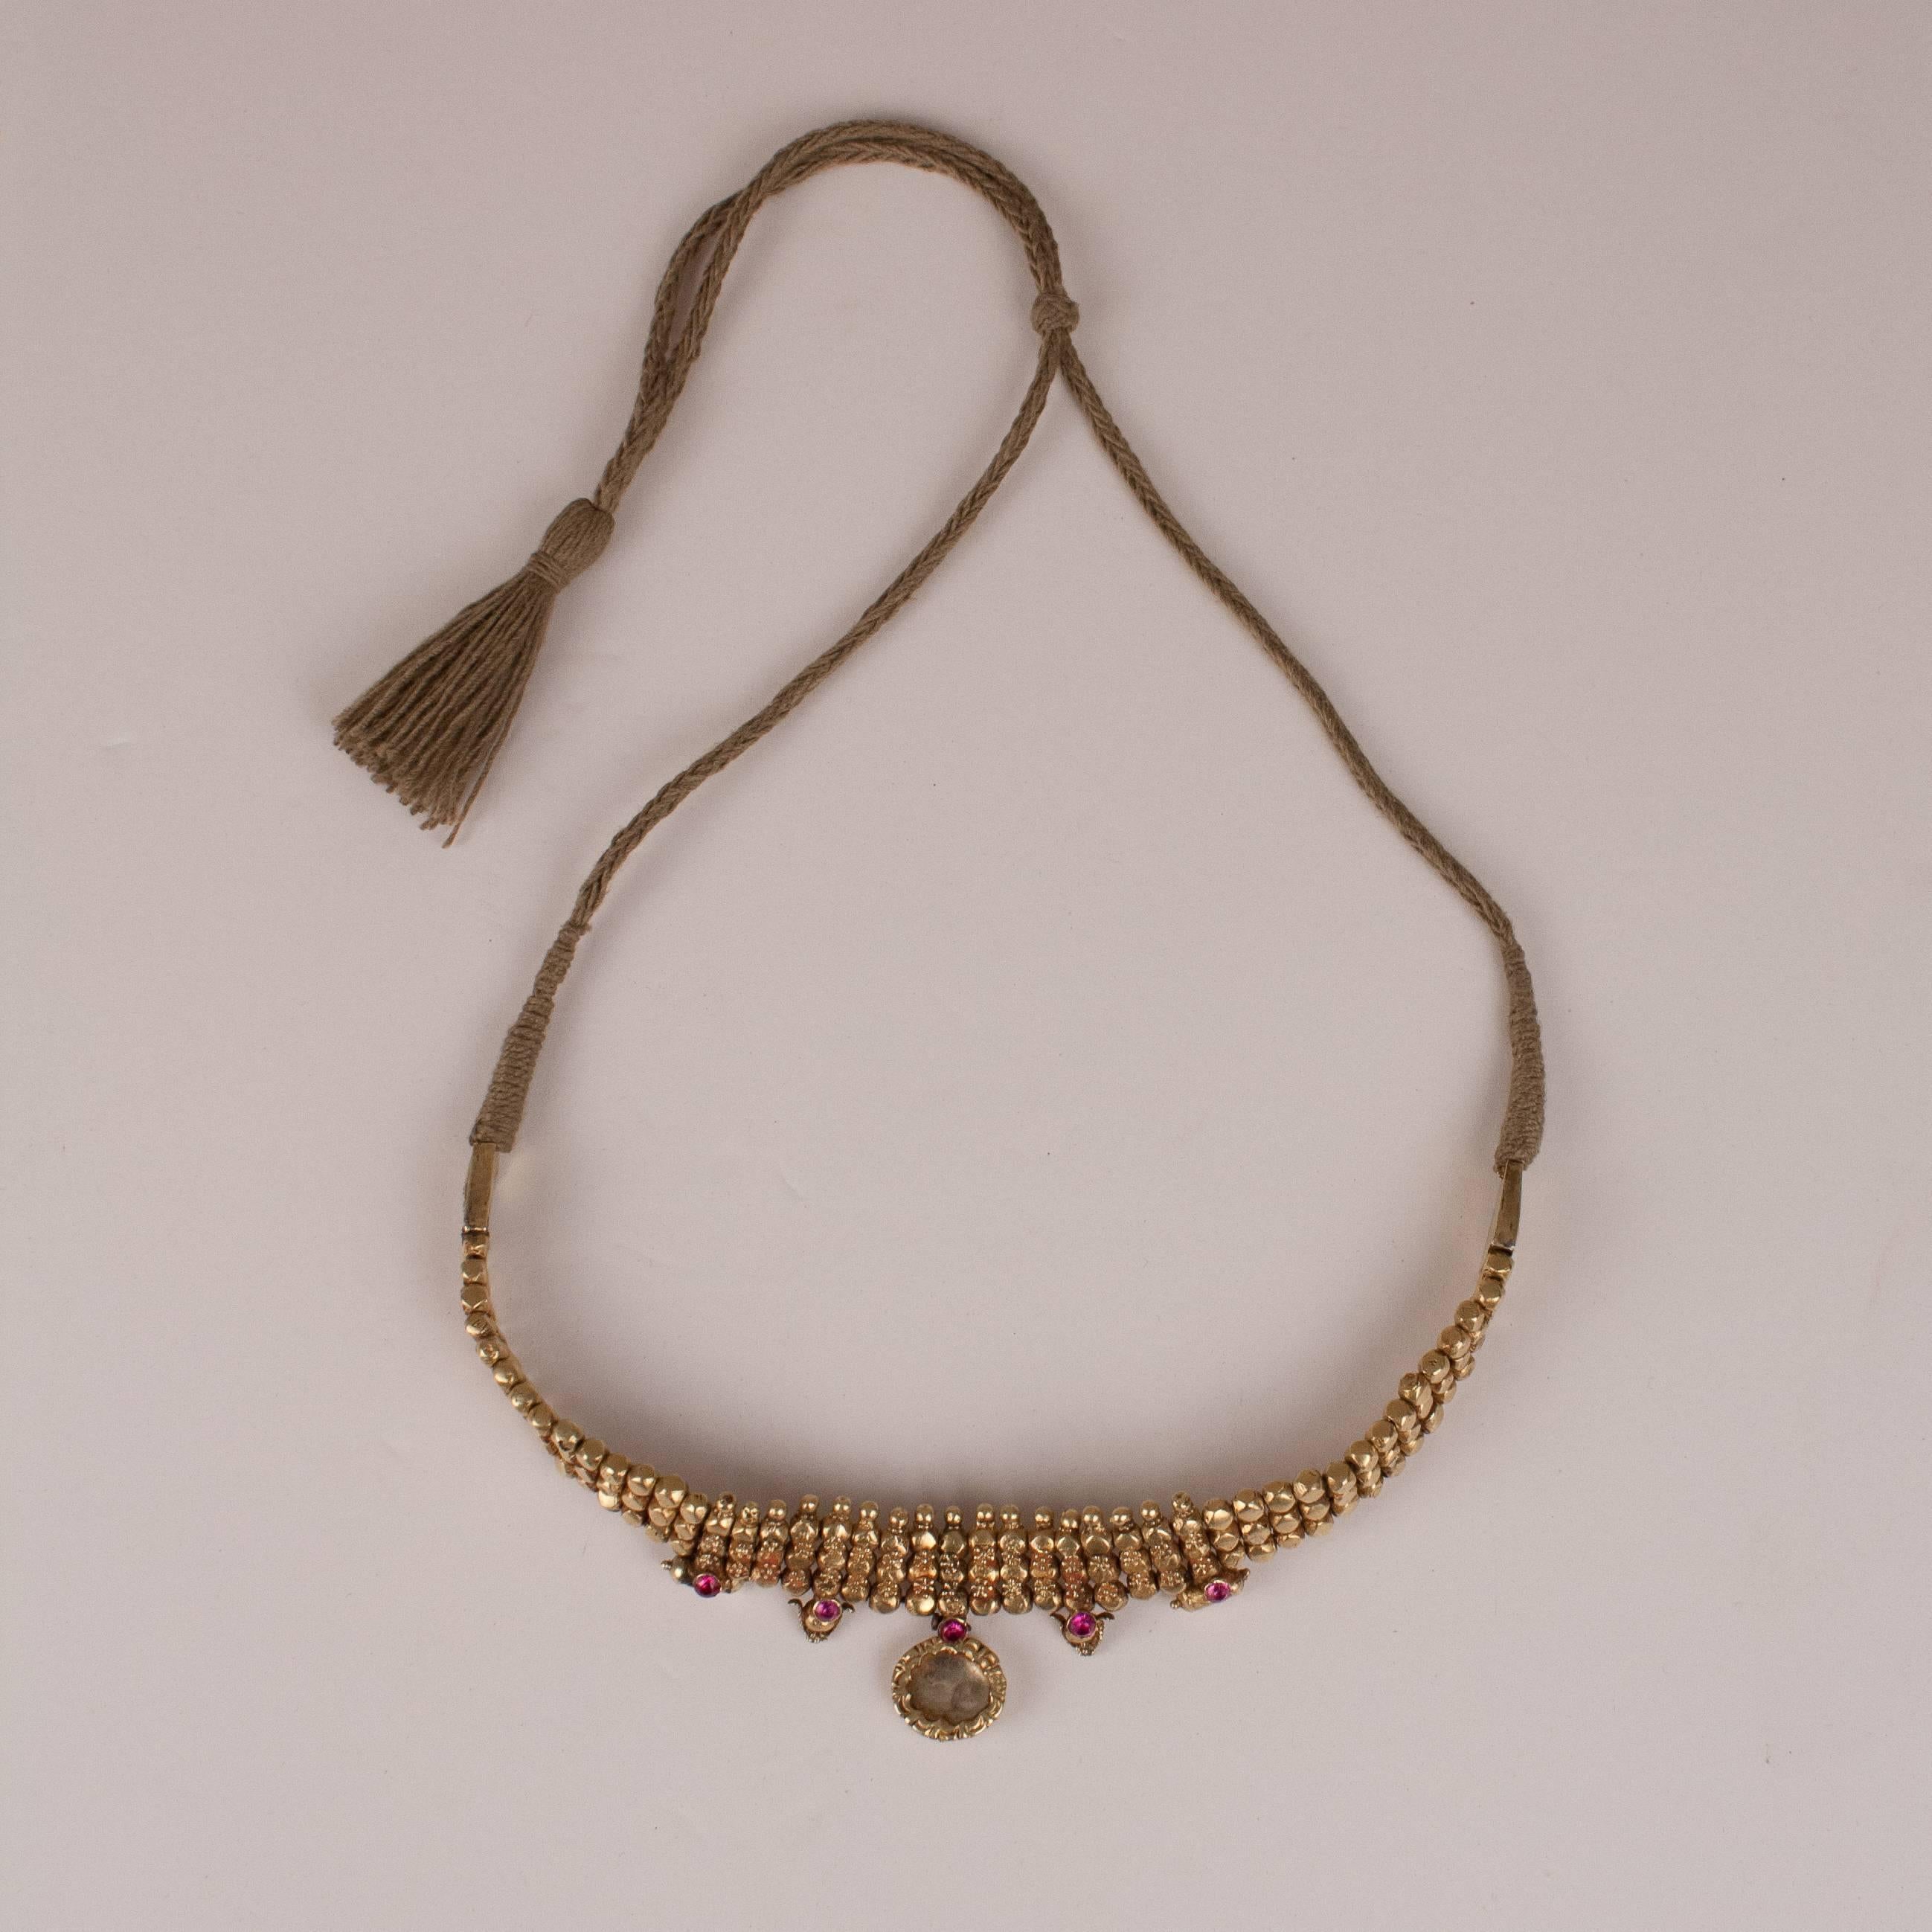 Anglo-Indian 22-Karat Gold, Ruby and Crystal Choker Necklace from India, circa 1930 For Sale